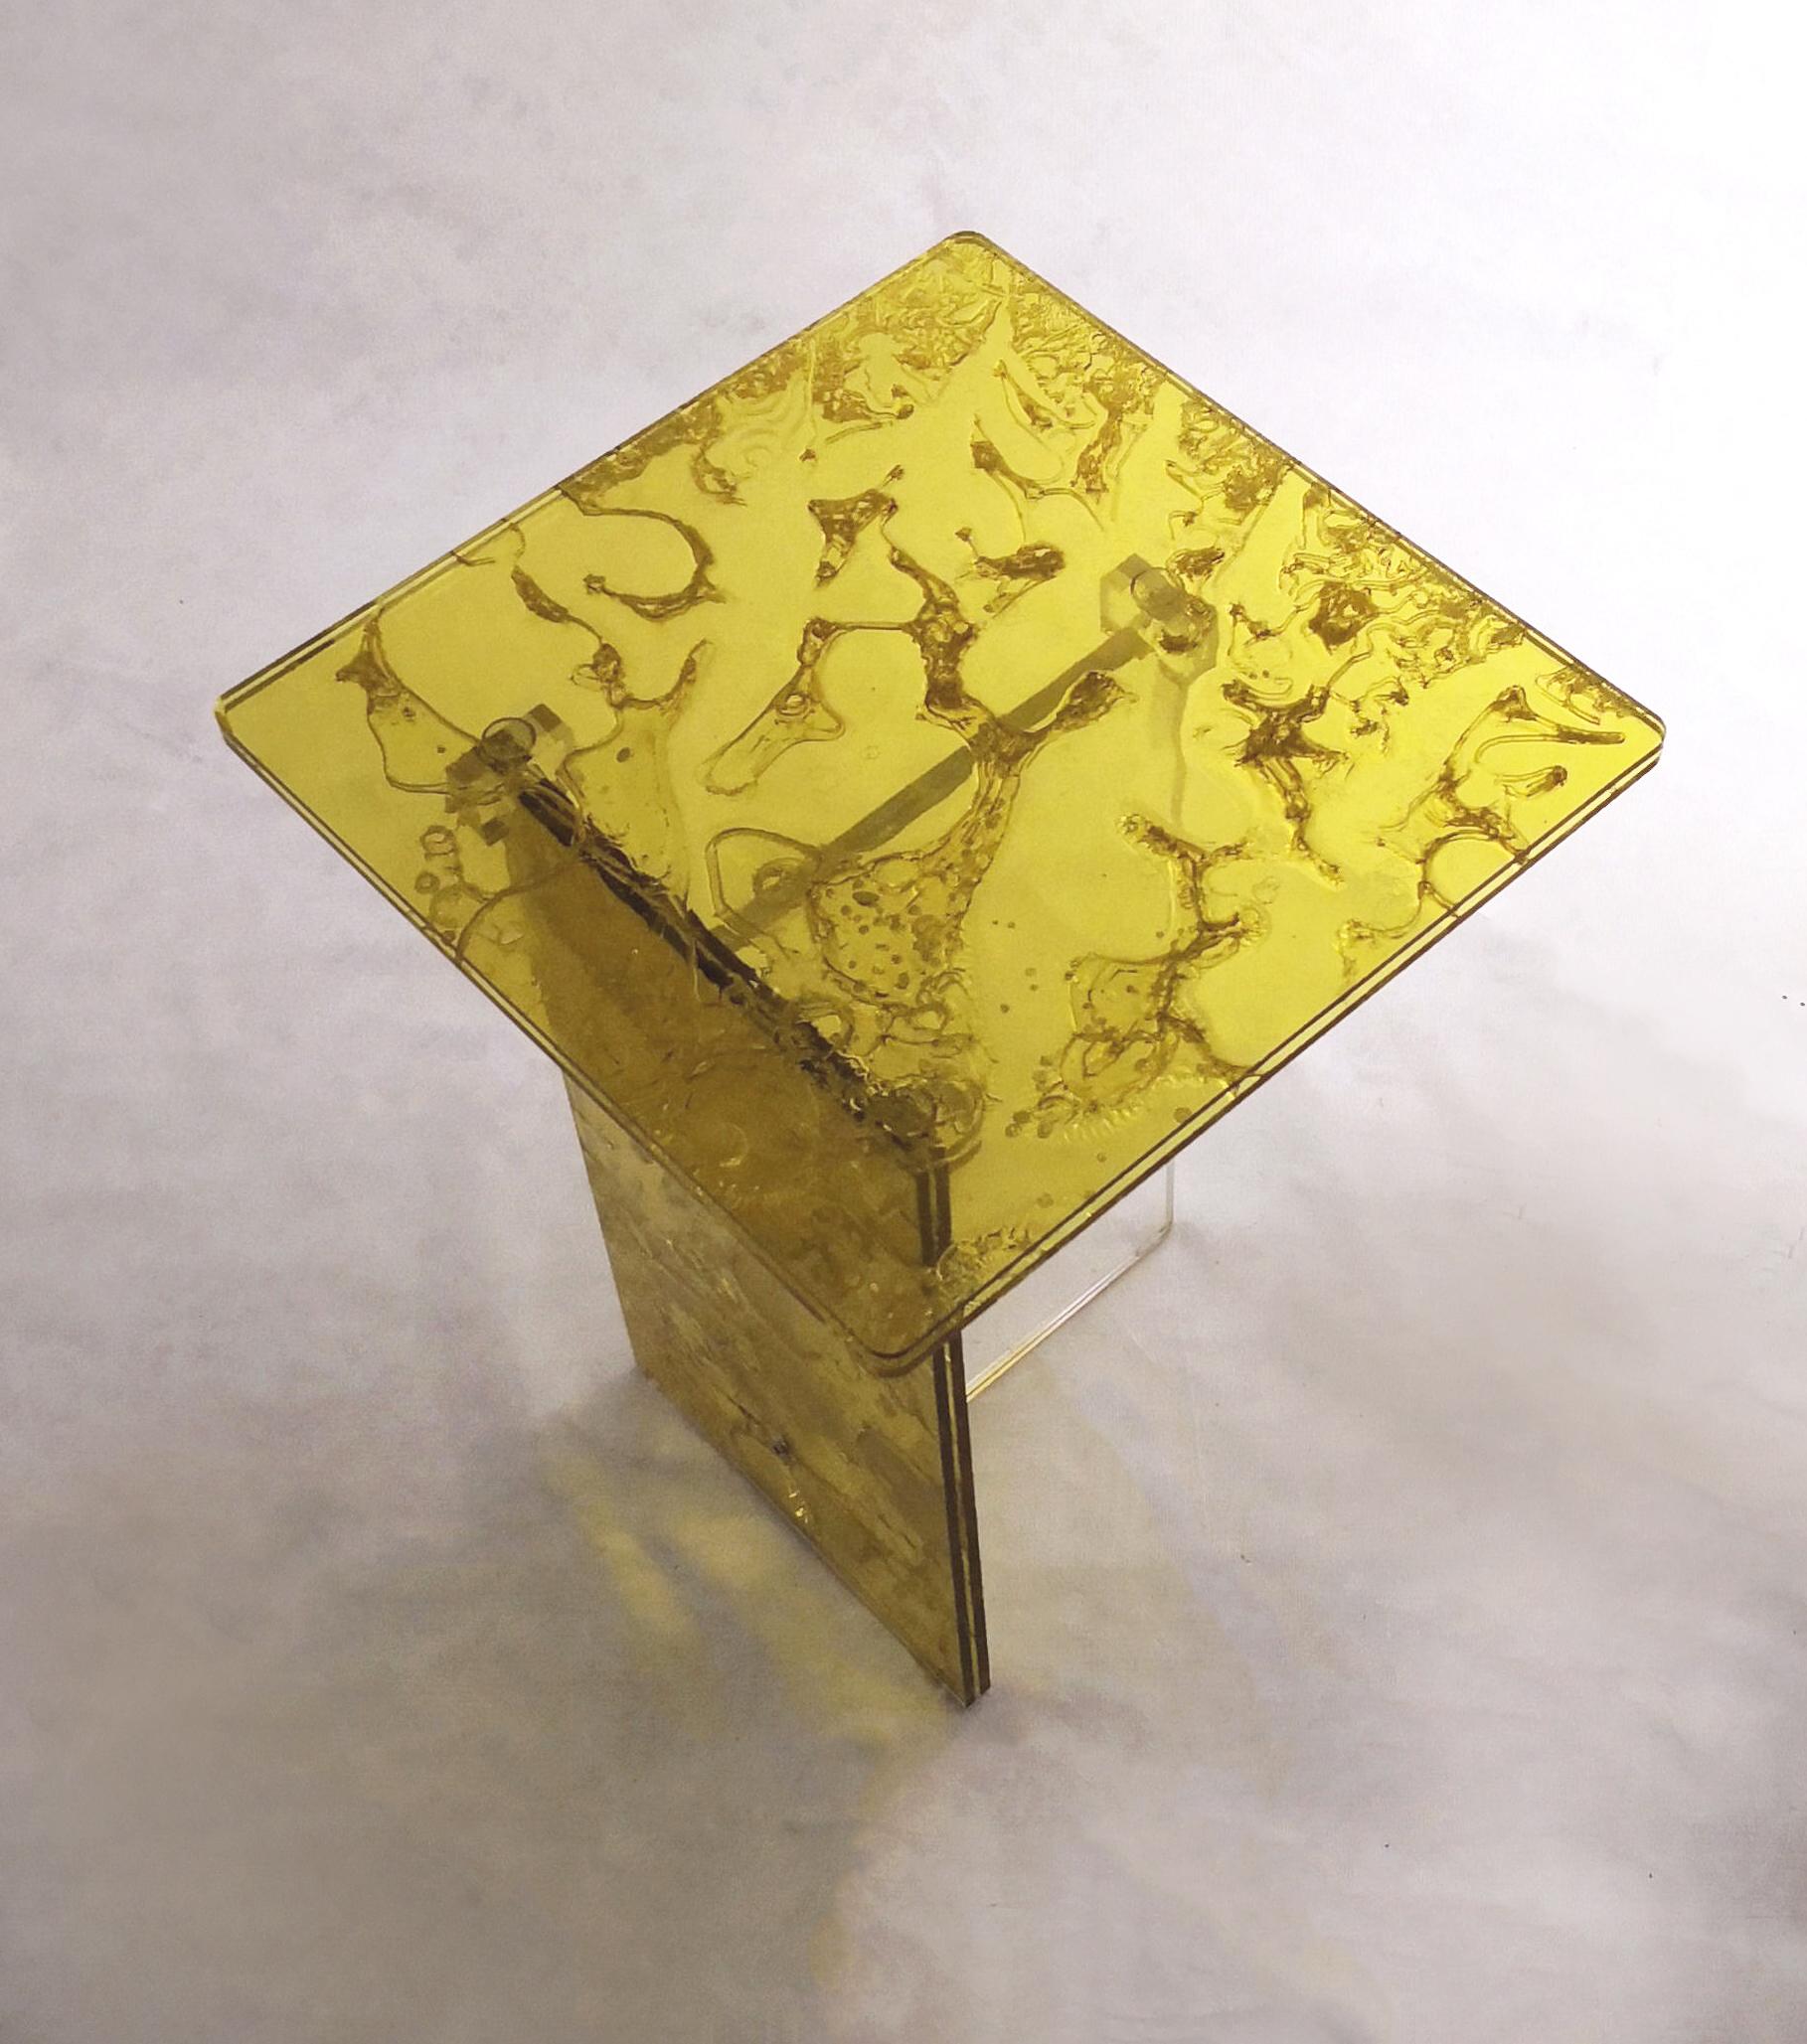 Machine-Made Sketch Mini Sidetable Made of Yellow Acrylic Des. Roberto Giacomucci in 2022 For Sale